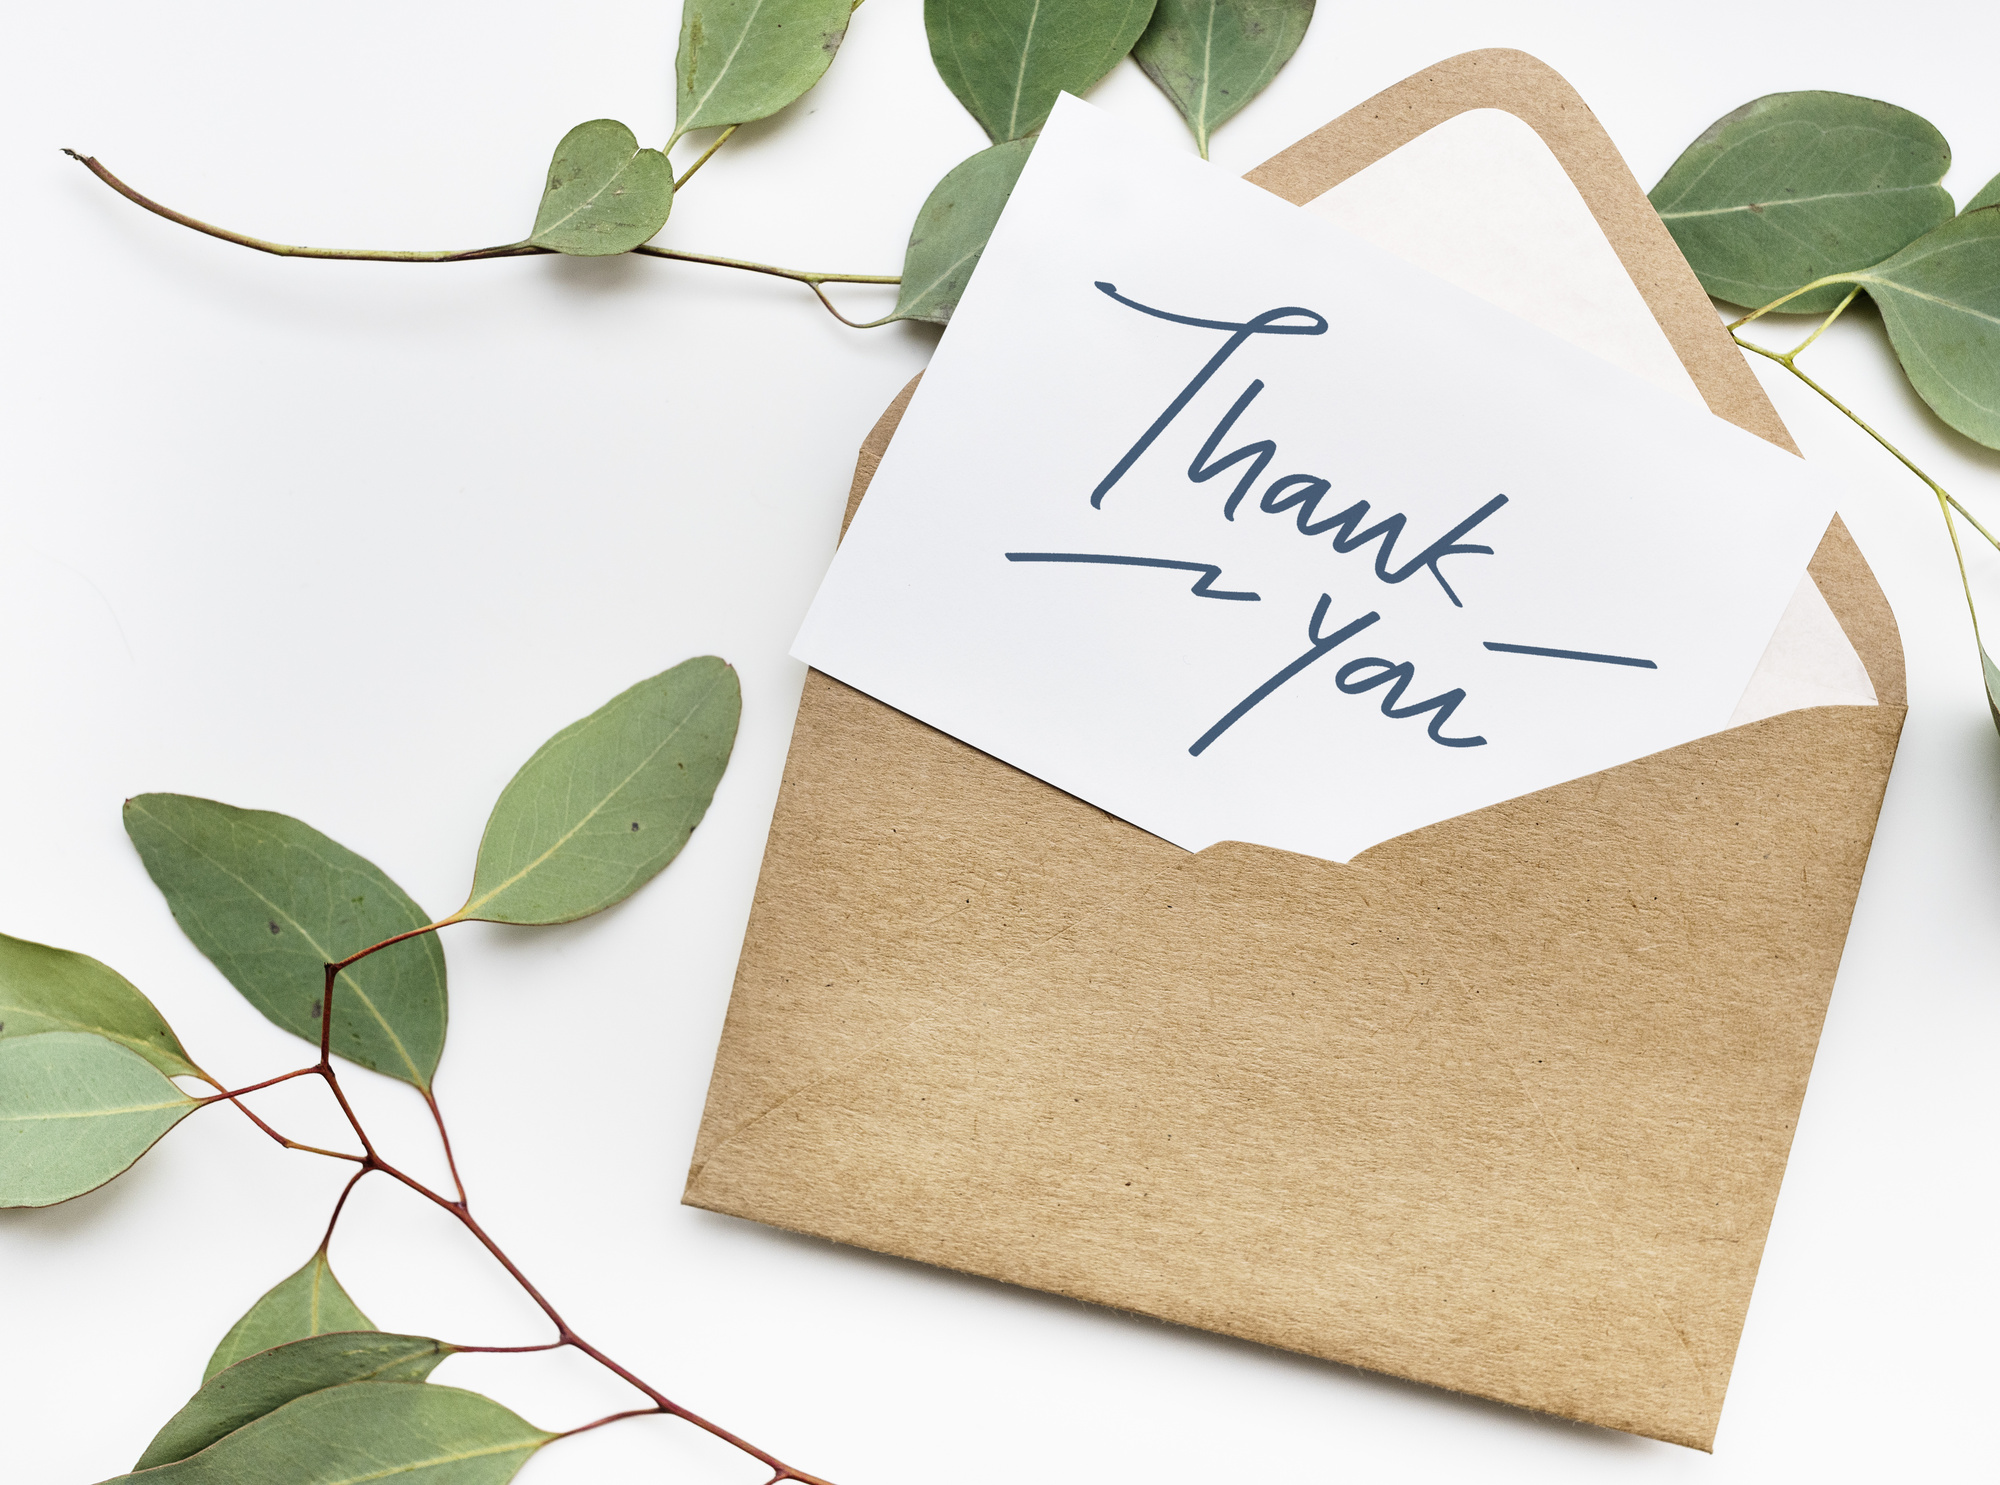 Referral Gifts and More: 5 Ways to Say Thank You For a Referral